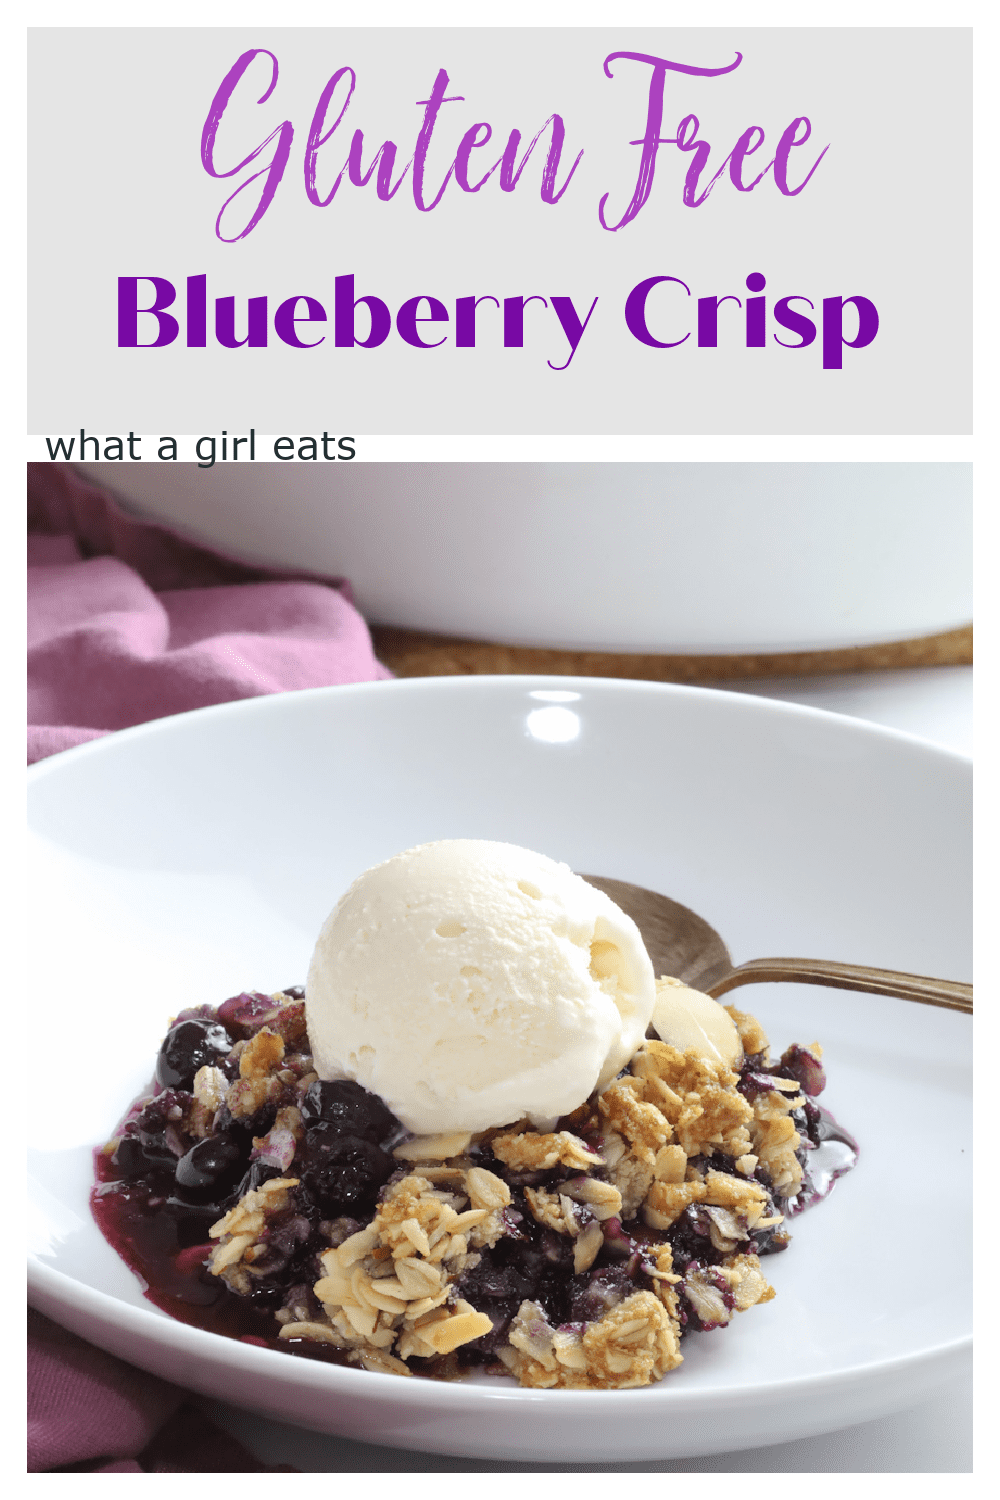 Blueberry crisp is a simple dessert topped with brown sugar, nuts and oats. This gluten free topping can be used on a variety of fruit!